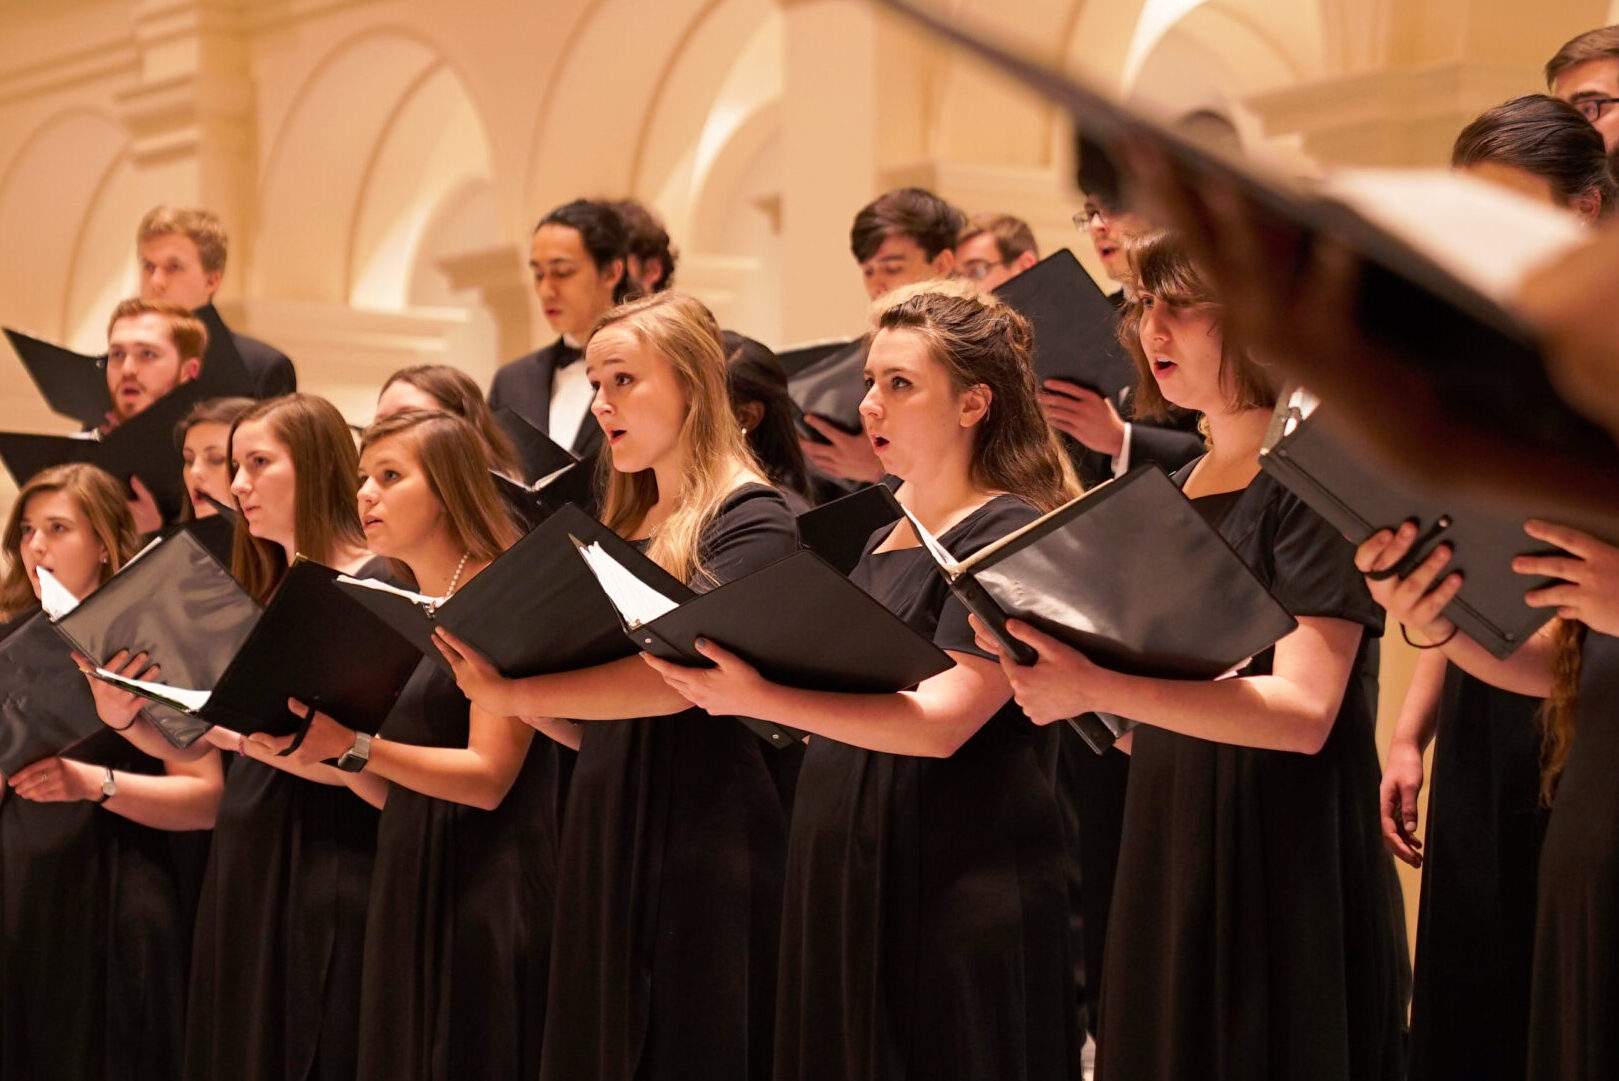 Photograph of the State Chorale performing inside Holy Name of Jesus Cathedral. Image shows a large group of students wearing formal attire, holding folders of sheet music and singing.